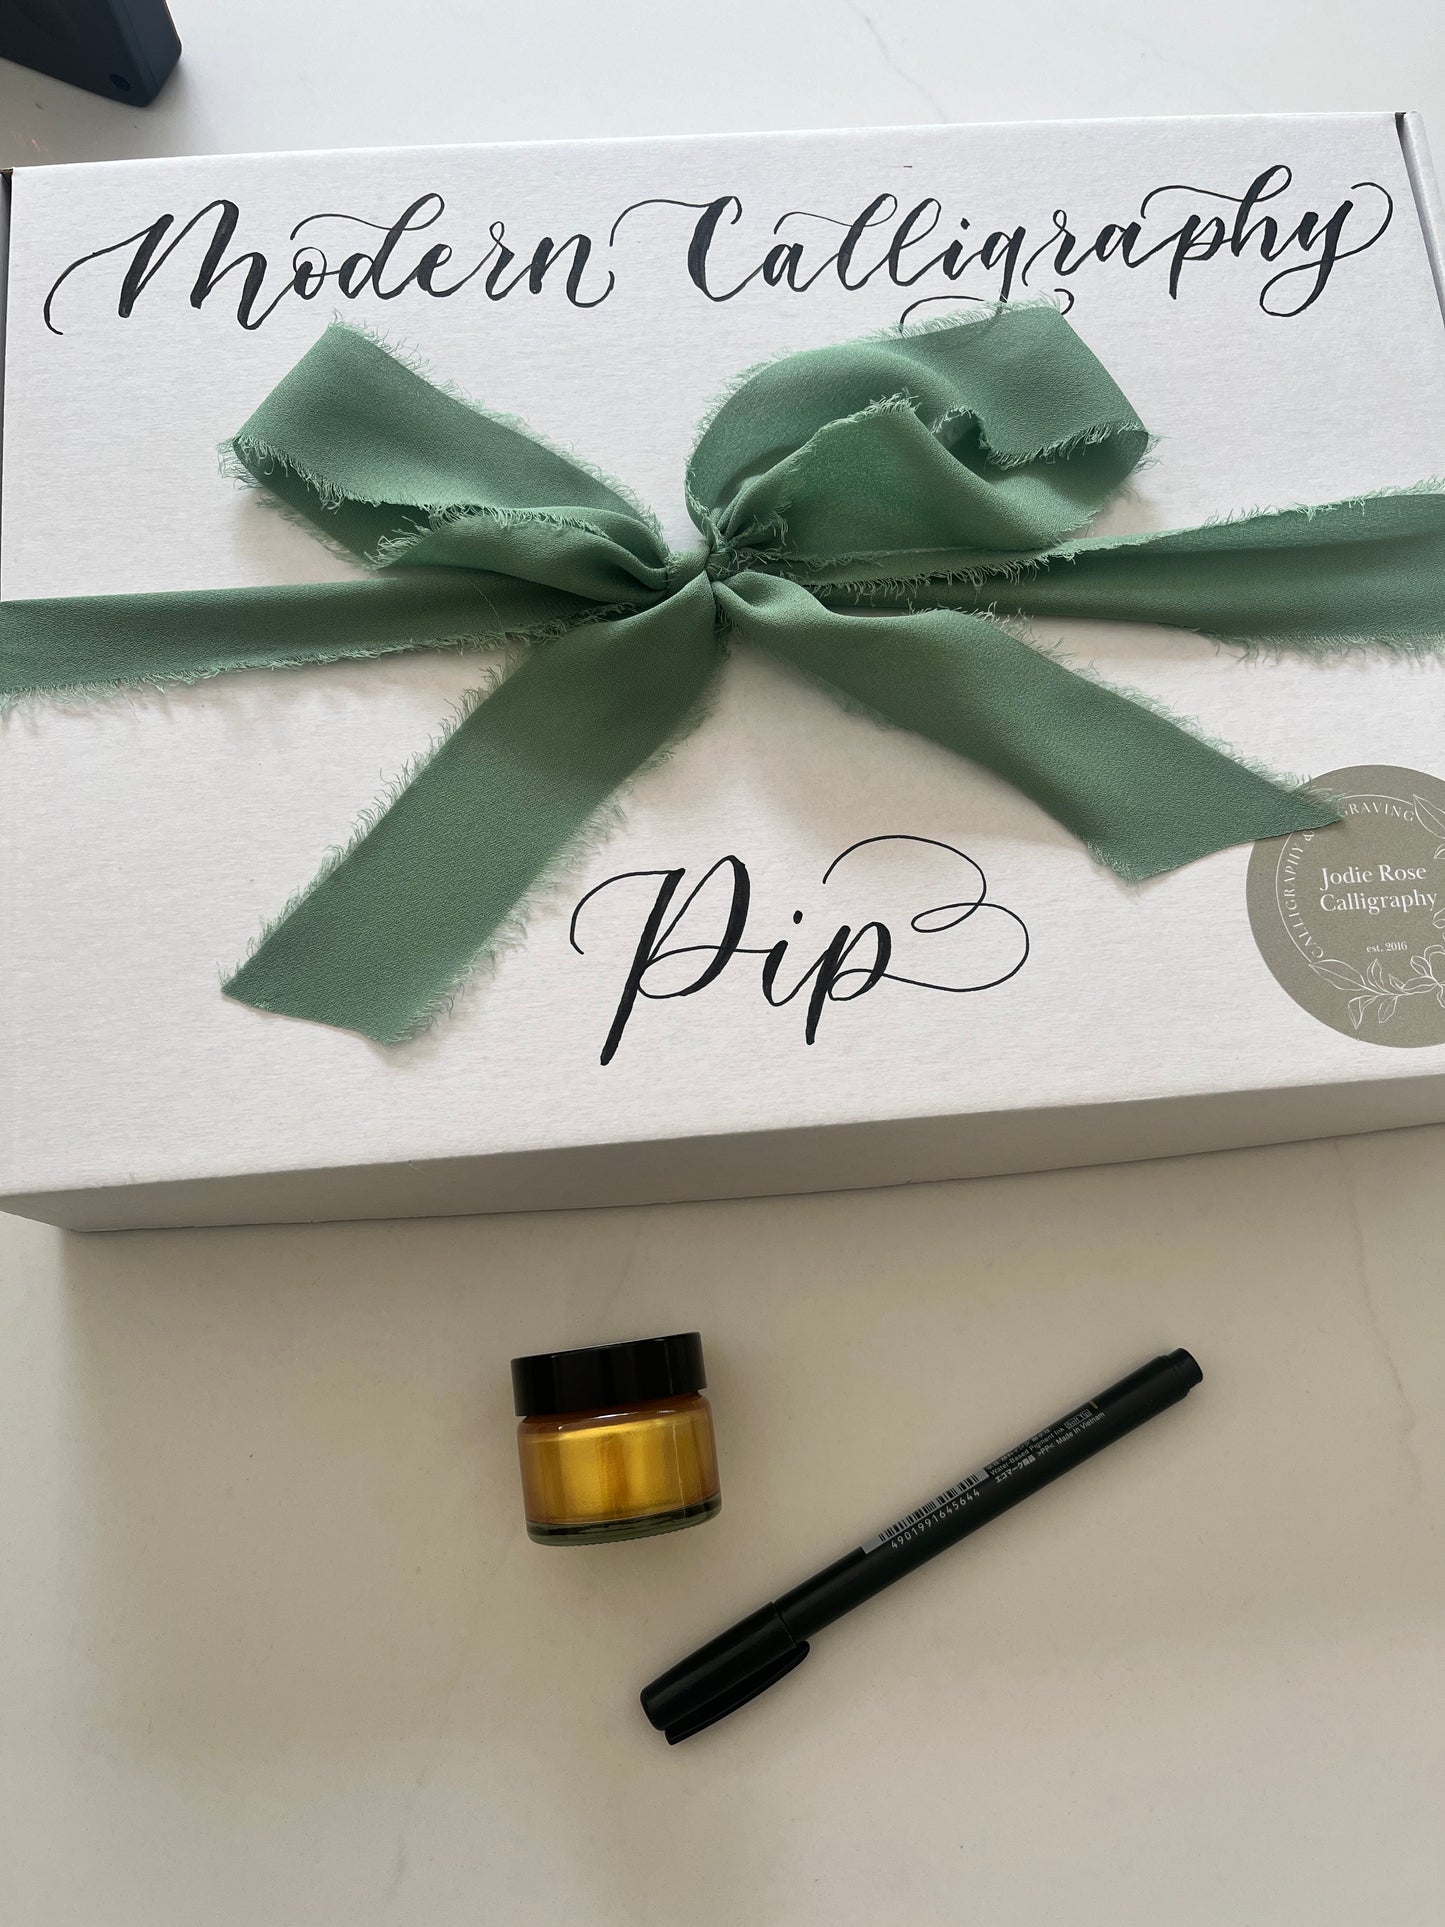 Modern Calligraphy Kit for Beginners - Complete Starter Set with calligraphy pen holder, nib, Ink, and Instructional Guided worksheets